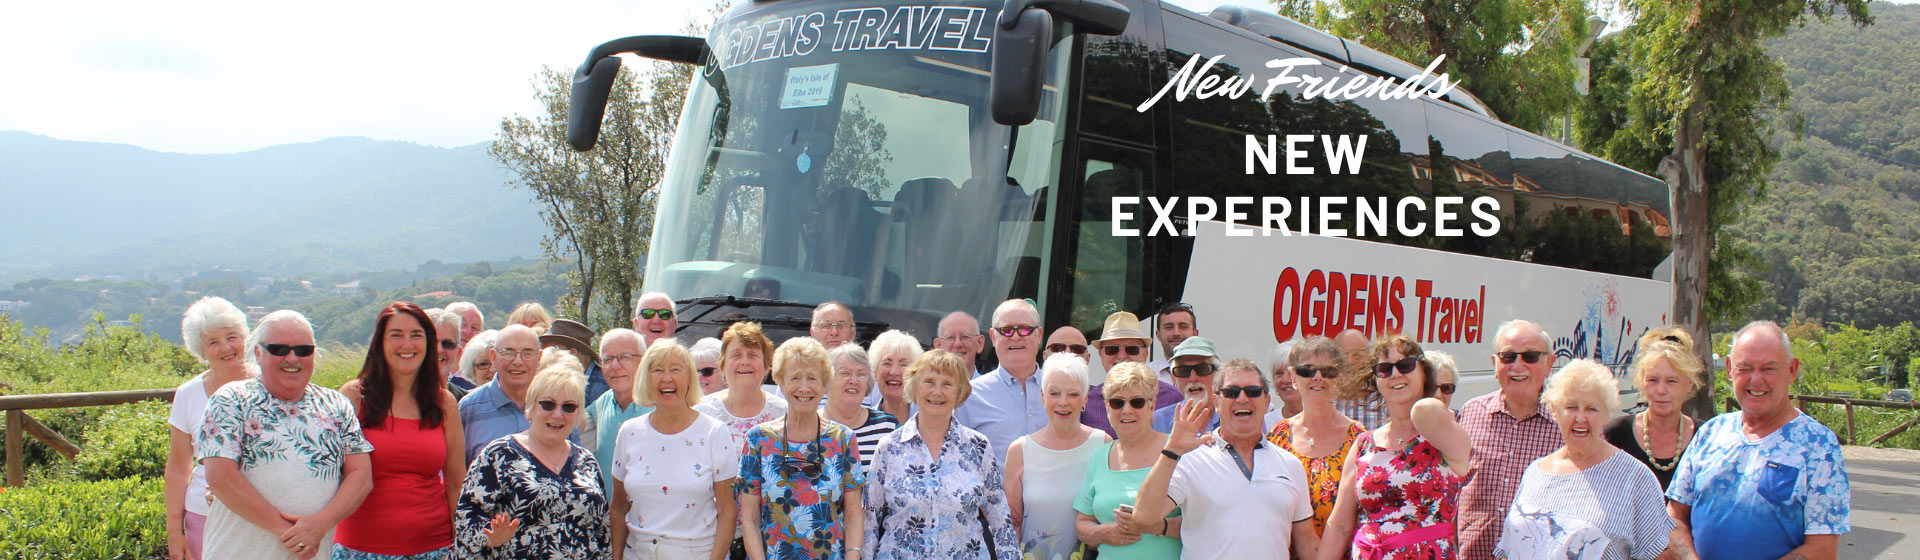 coach trips for singles uk